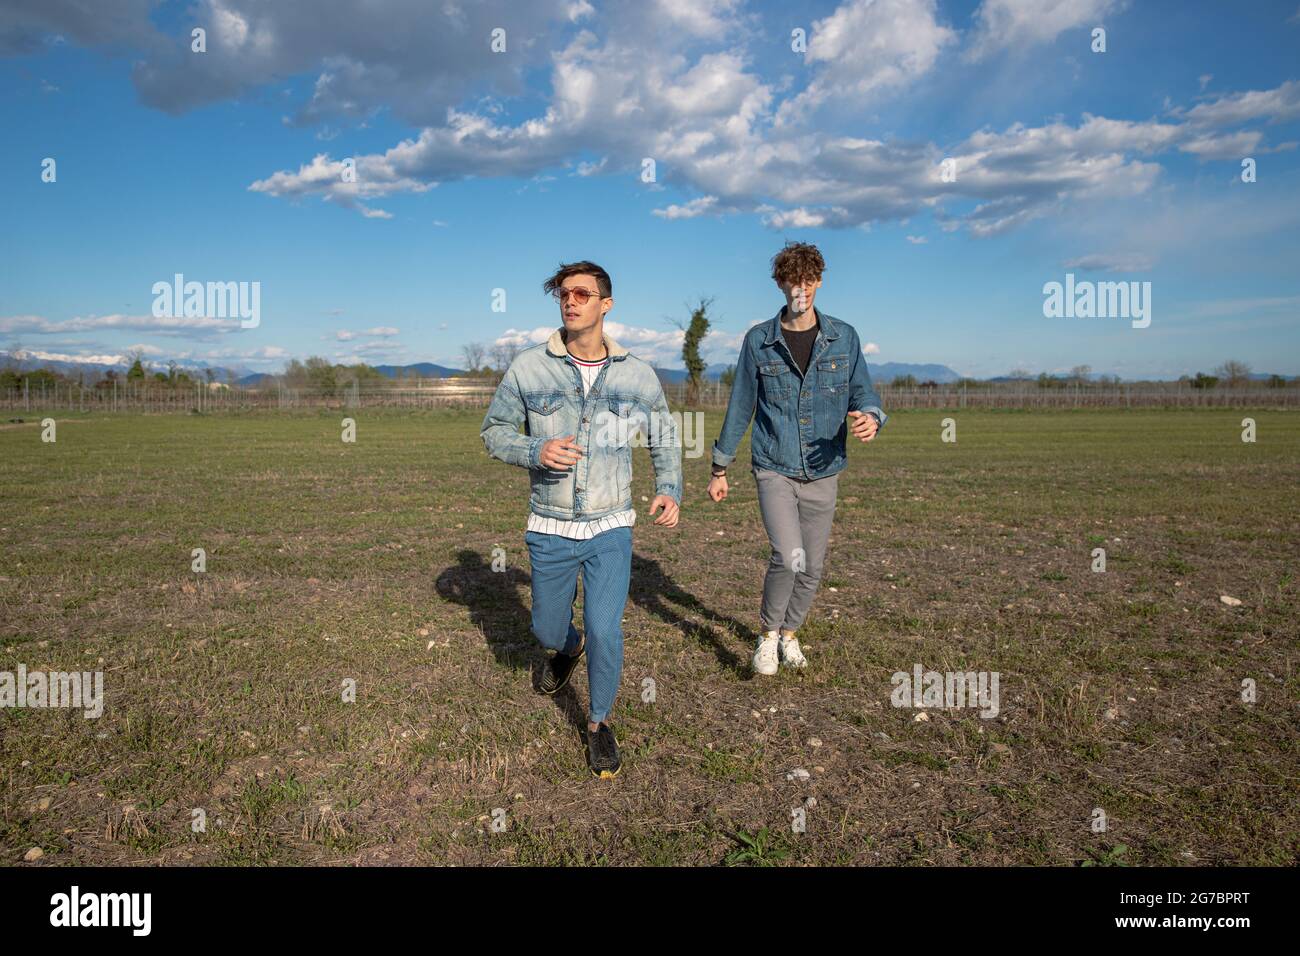 Two brothers run in a field of grass in the open air, young men dressed causally, wearing denim jackets. brotherhood concept. Stock Photo